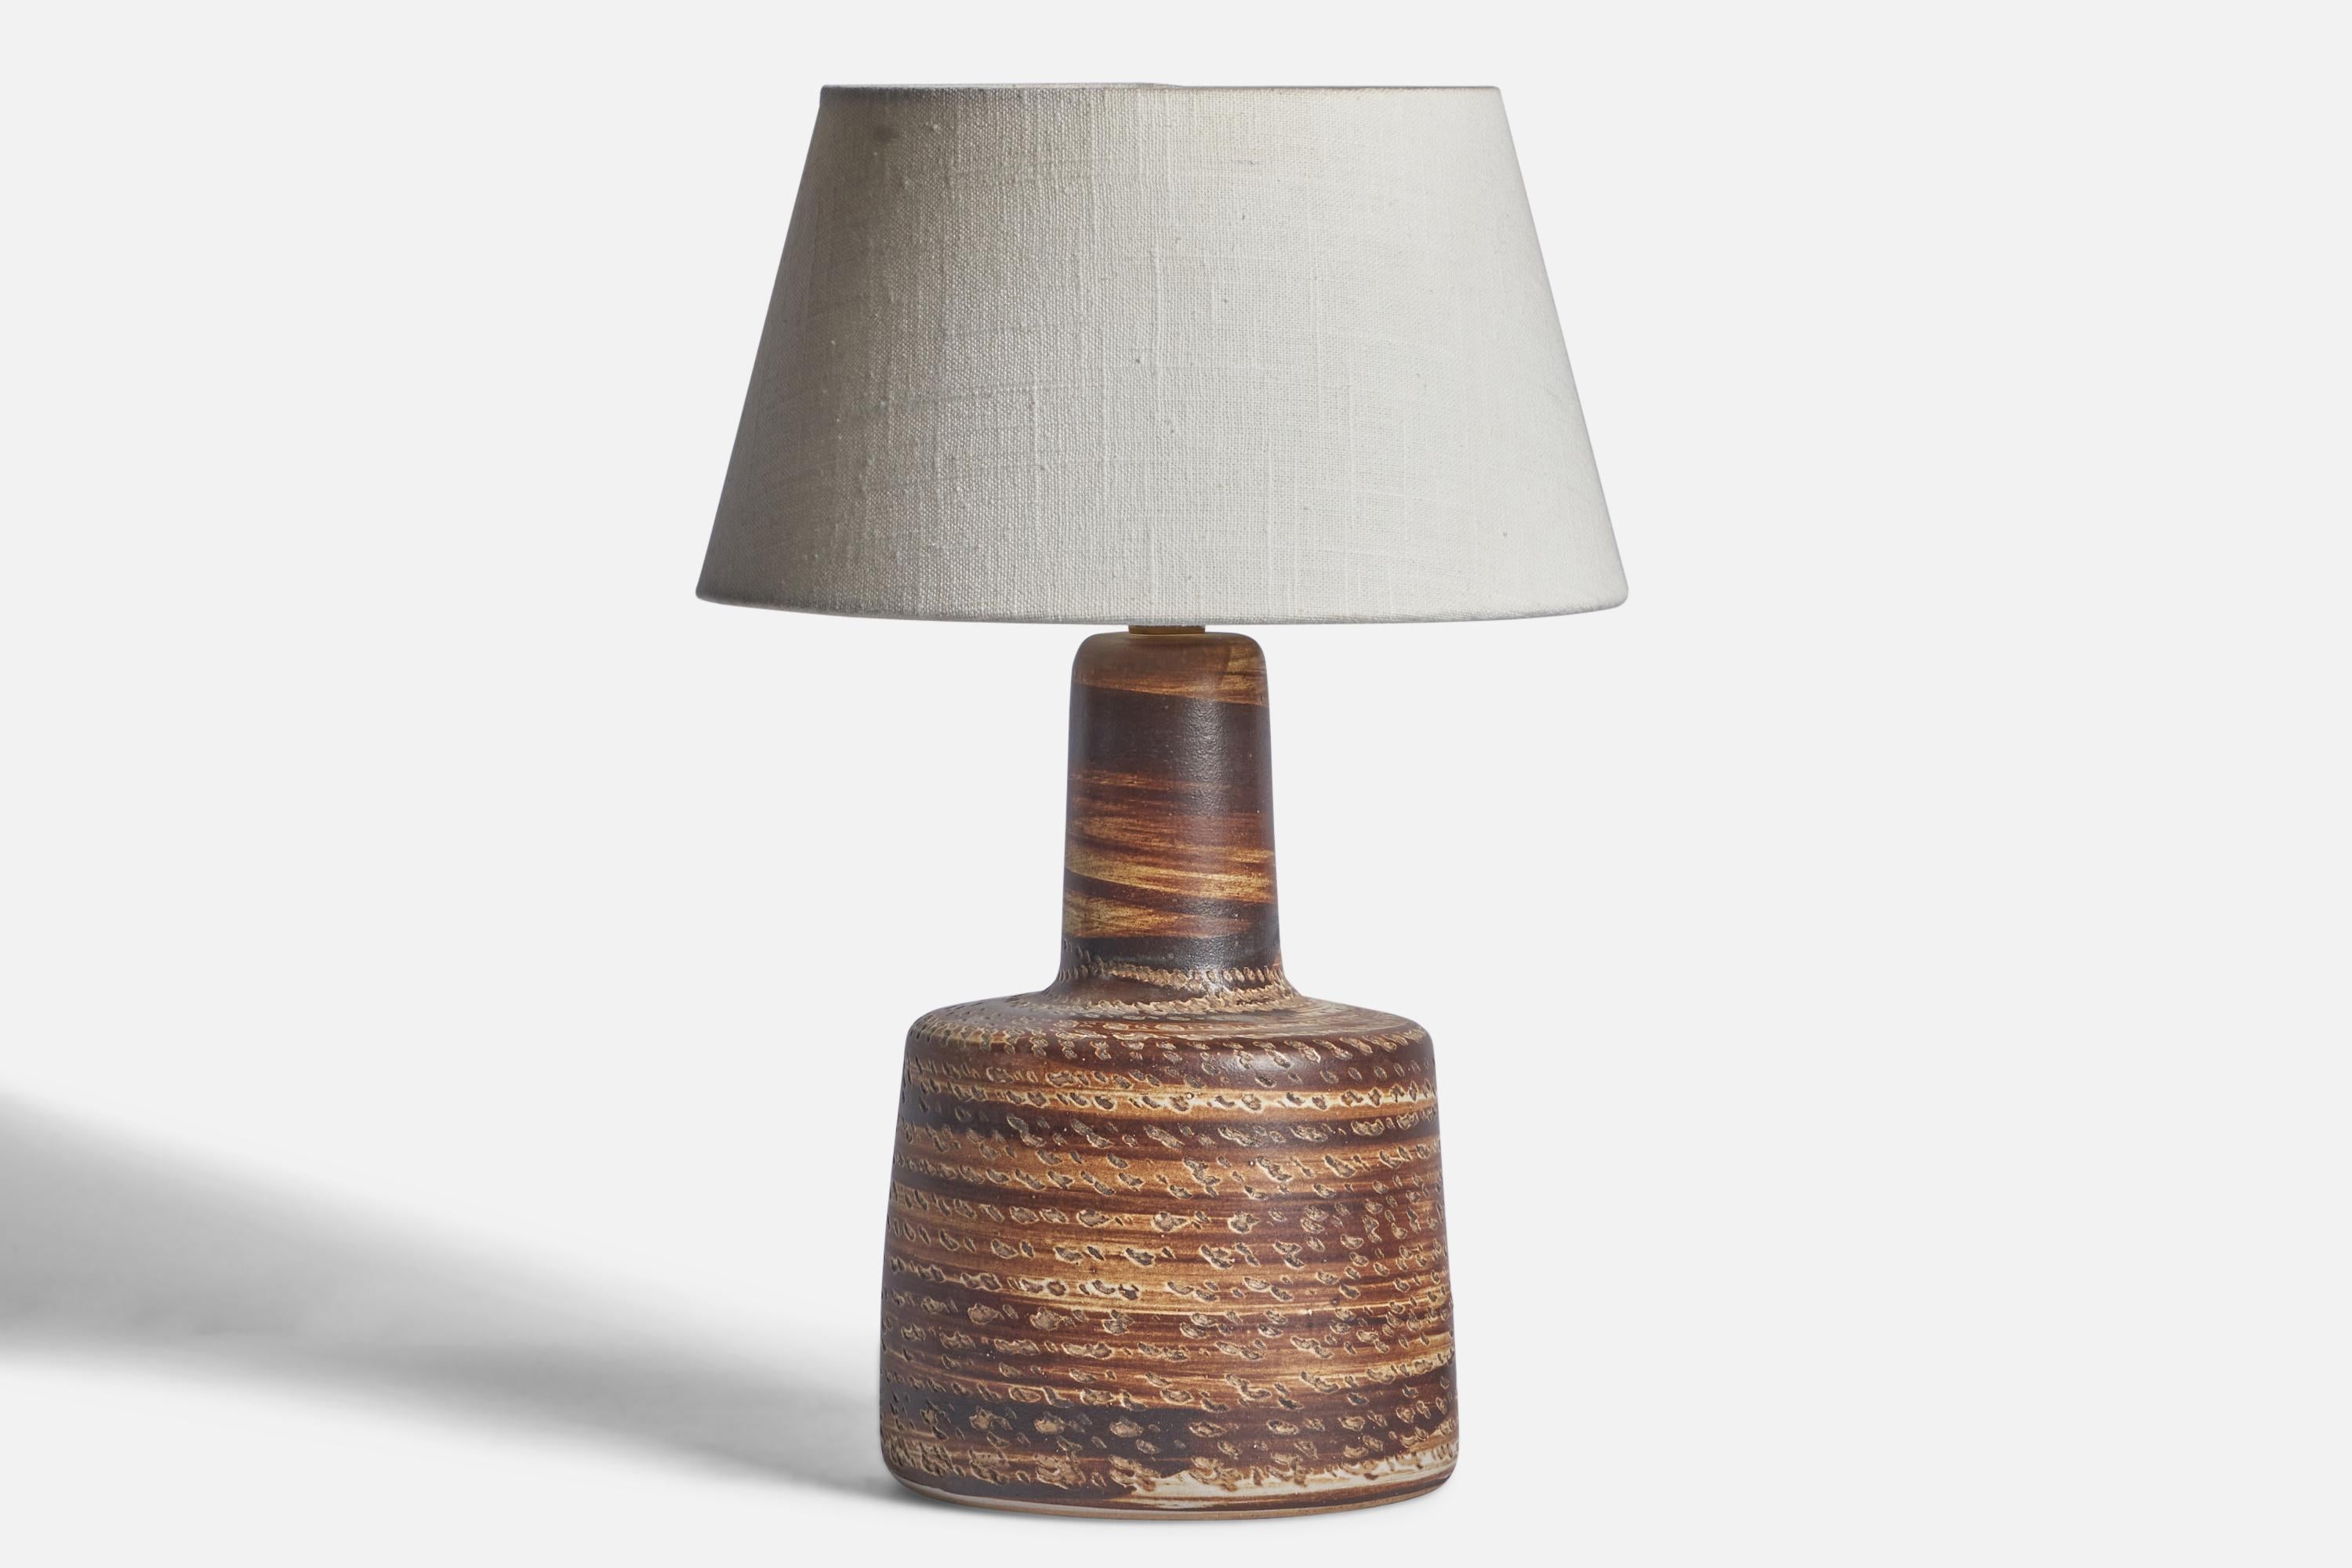 A beige and brown-glazed ceramic table lamp designed by Jane & Gordon Martz and produced by Marshall Studios, USA, 1960s.

Dimensions of Lamp (inches): 12” H x 6.25” Diameter
Dimensions of Shade (inches): 7” Top Diameter x 10” Bottom Diameter x 5.5”